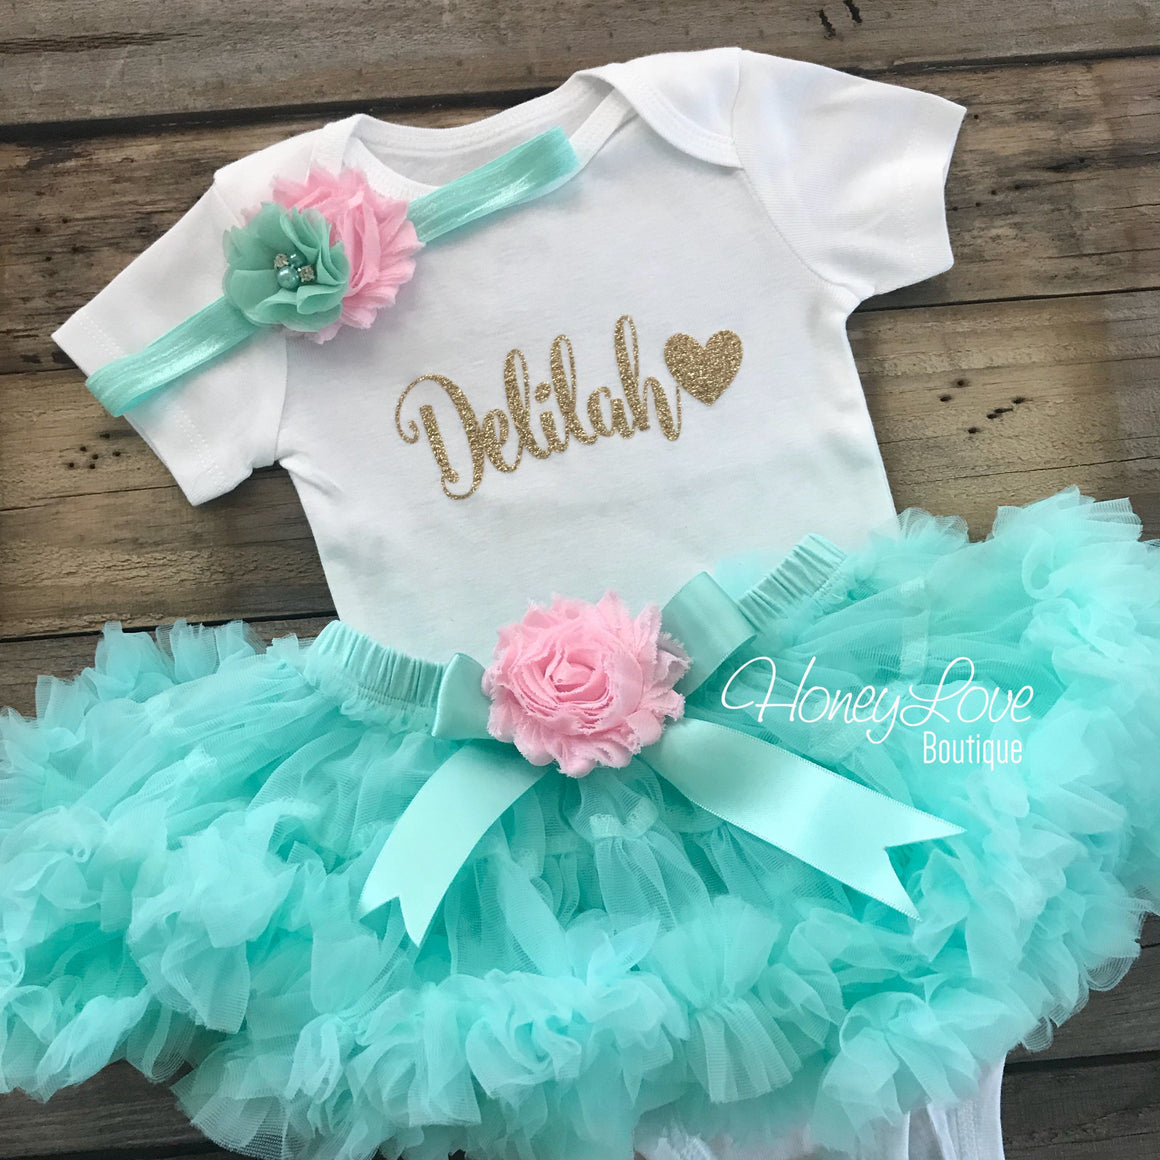 PERSONALIZED Name Outfit - Mint/Aqua and Gold Glitter - Light Pink shabby flower embellished pettiskirt - HoneyLoveBoutique